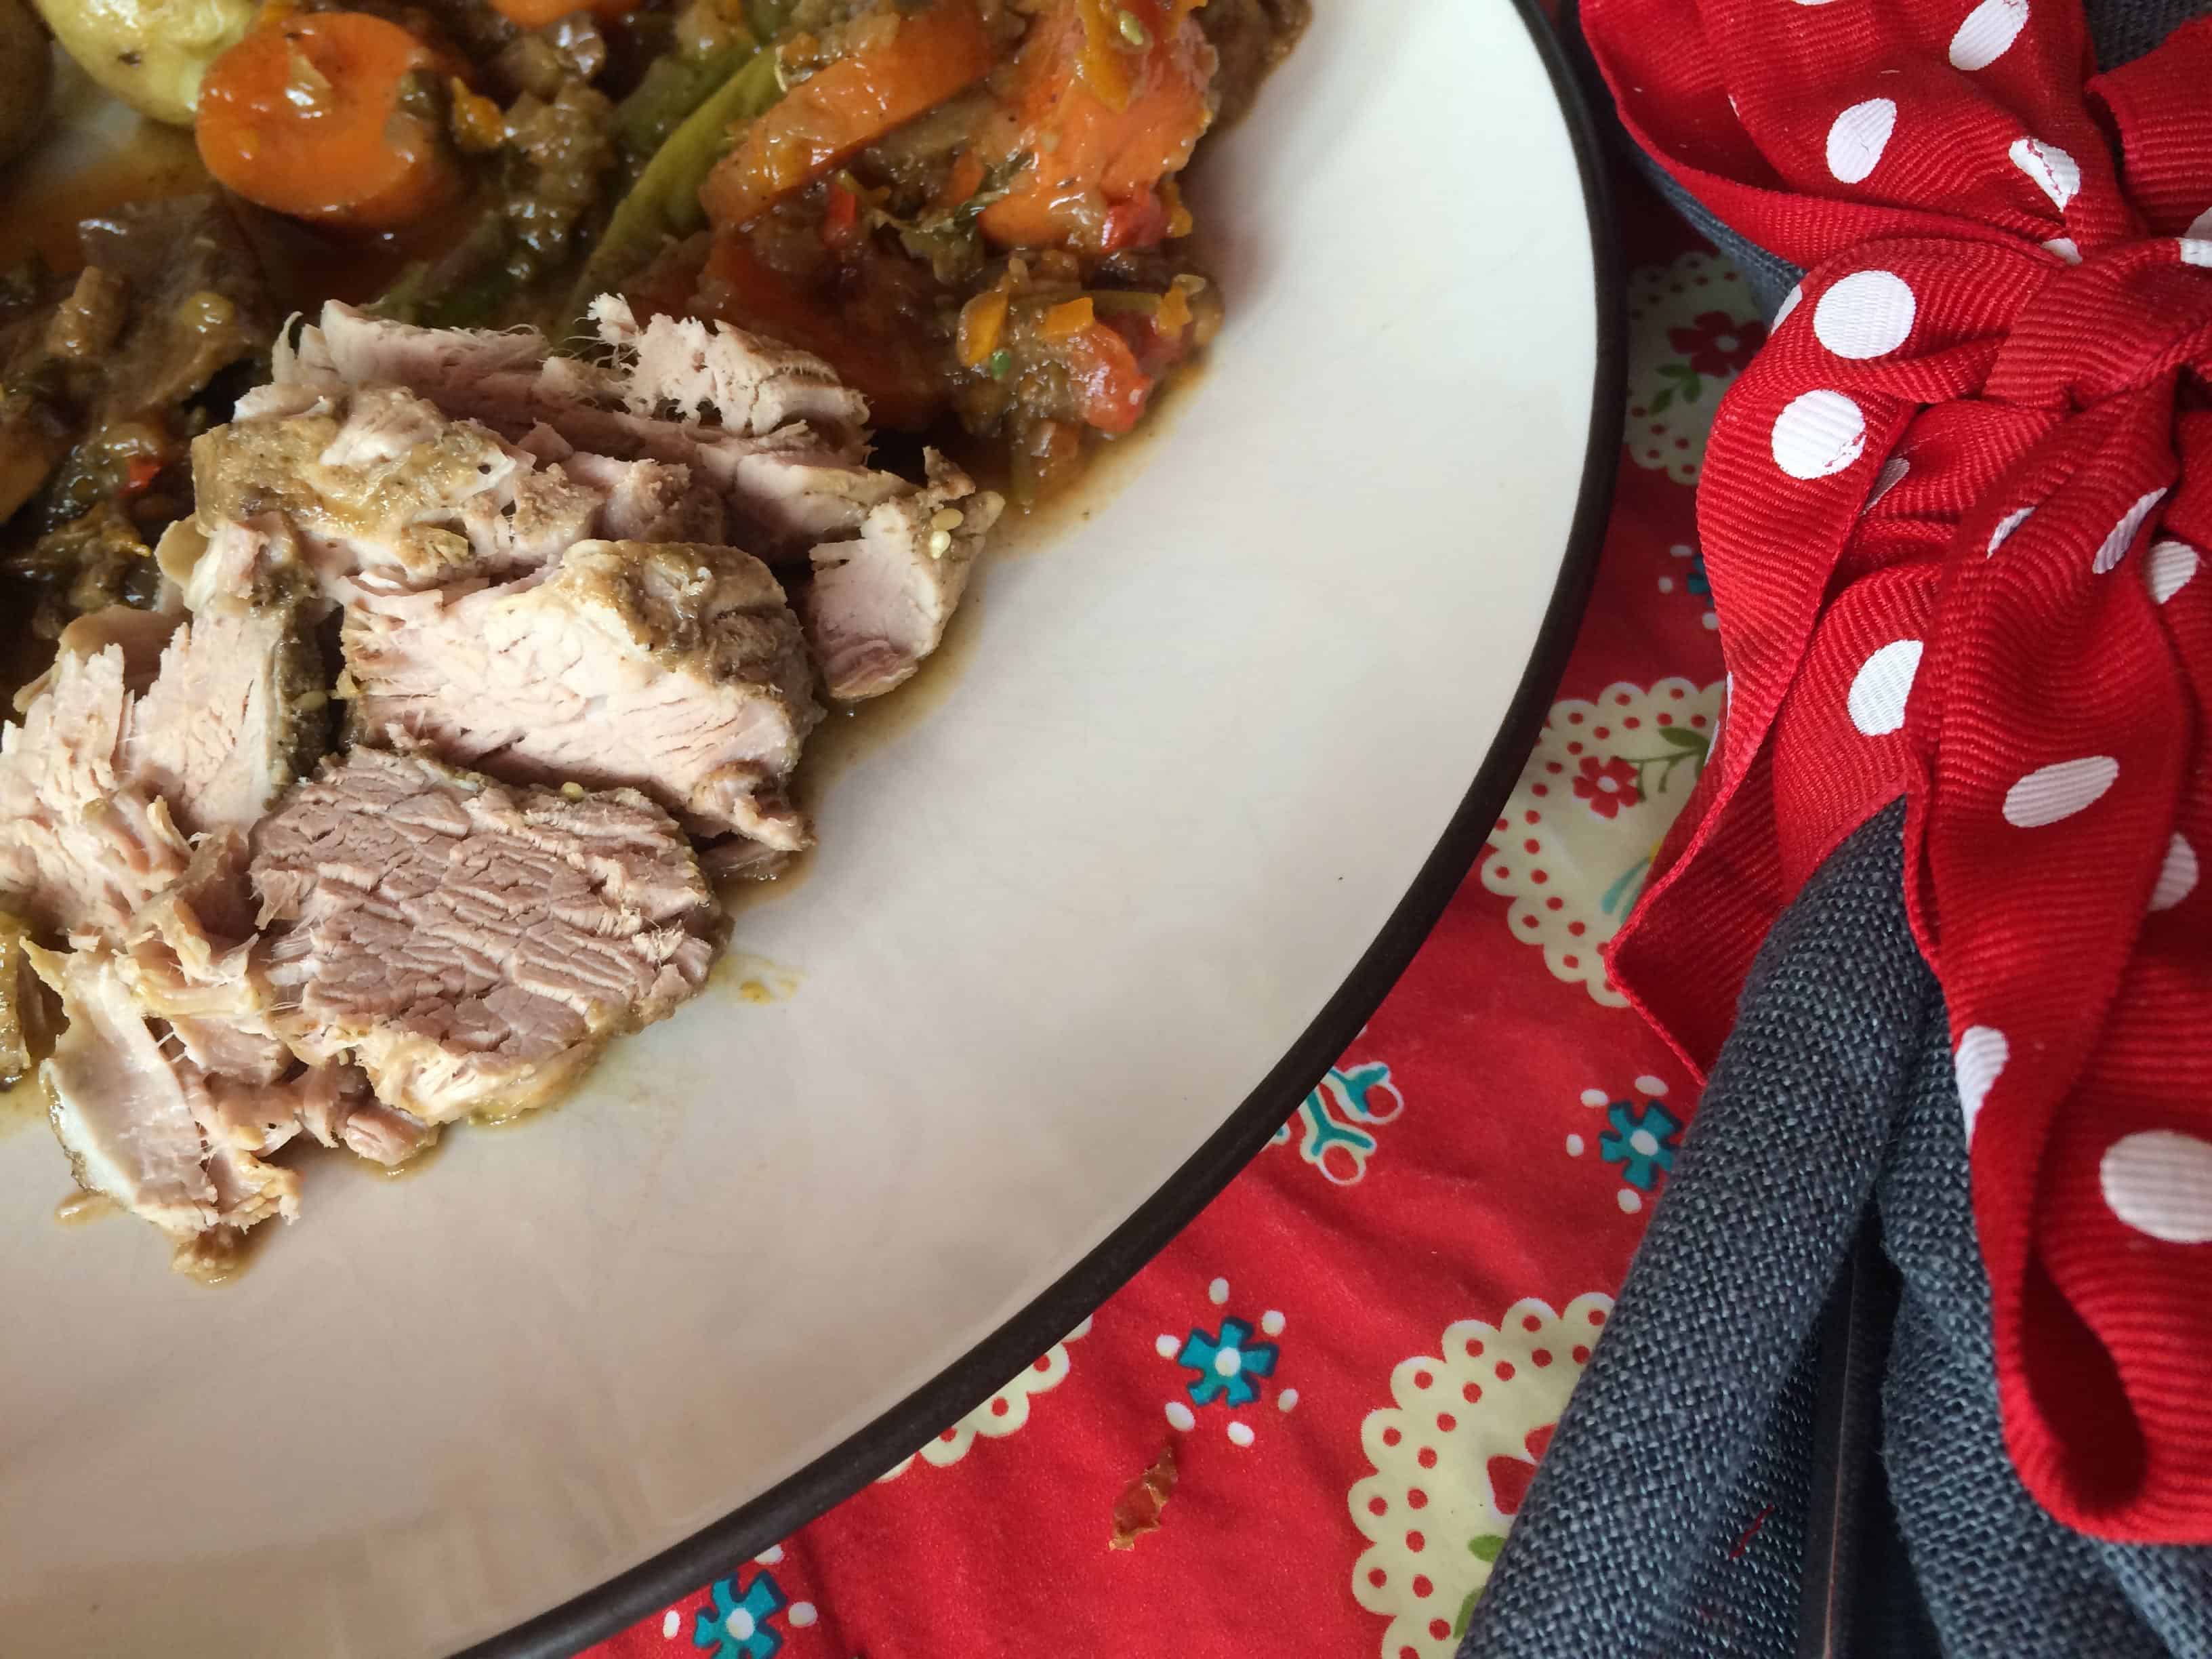 Sliced Instant Pot Zaatar Pork with Vegetables served on an off white stoneware plate. Dark grey fabric napkin on the right with spotty ribbon (red background with white polka dots) on a red patterned tablecloth